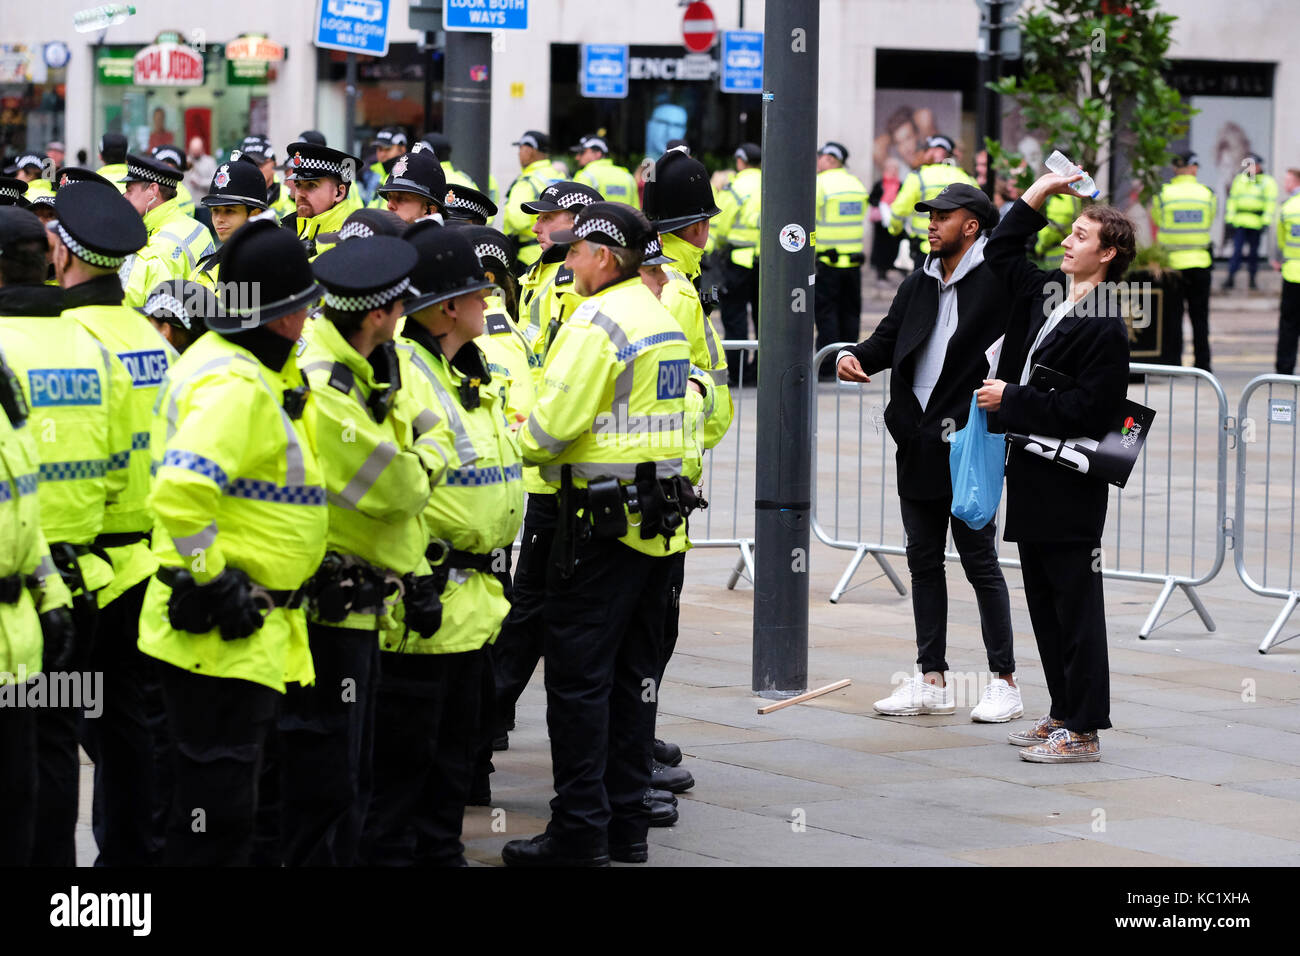 St Peters Square, Manchester, UK - Sunday 1st October 2017 - An anti government protester prepares to pass a bottle of water into a small group of fellow protesters who have been surrounded and kettled by Police just outside the Conservative Party Conference. Photo Steven May / Alamy Live News Stock Photo